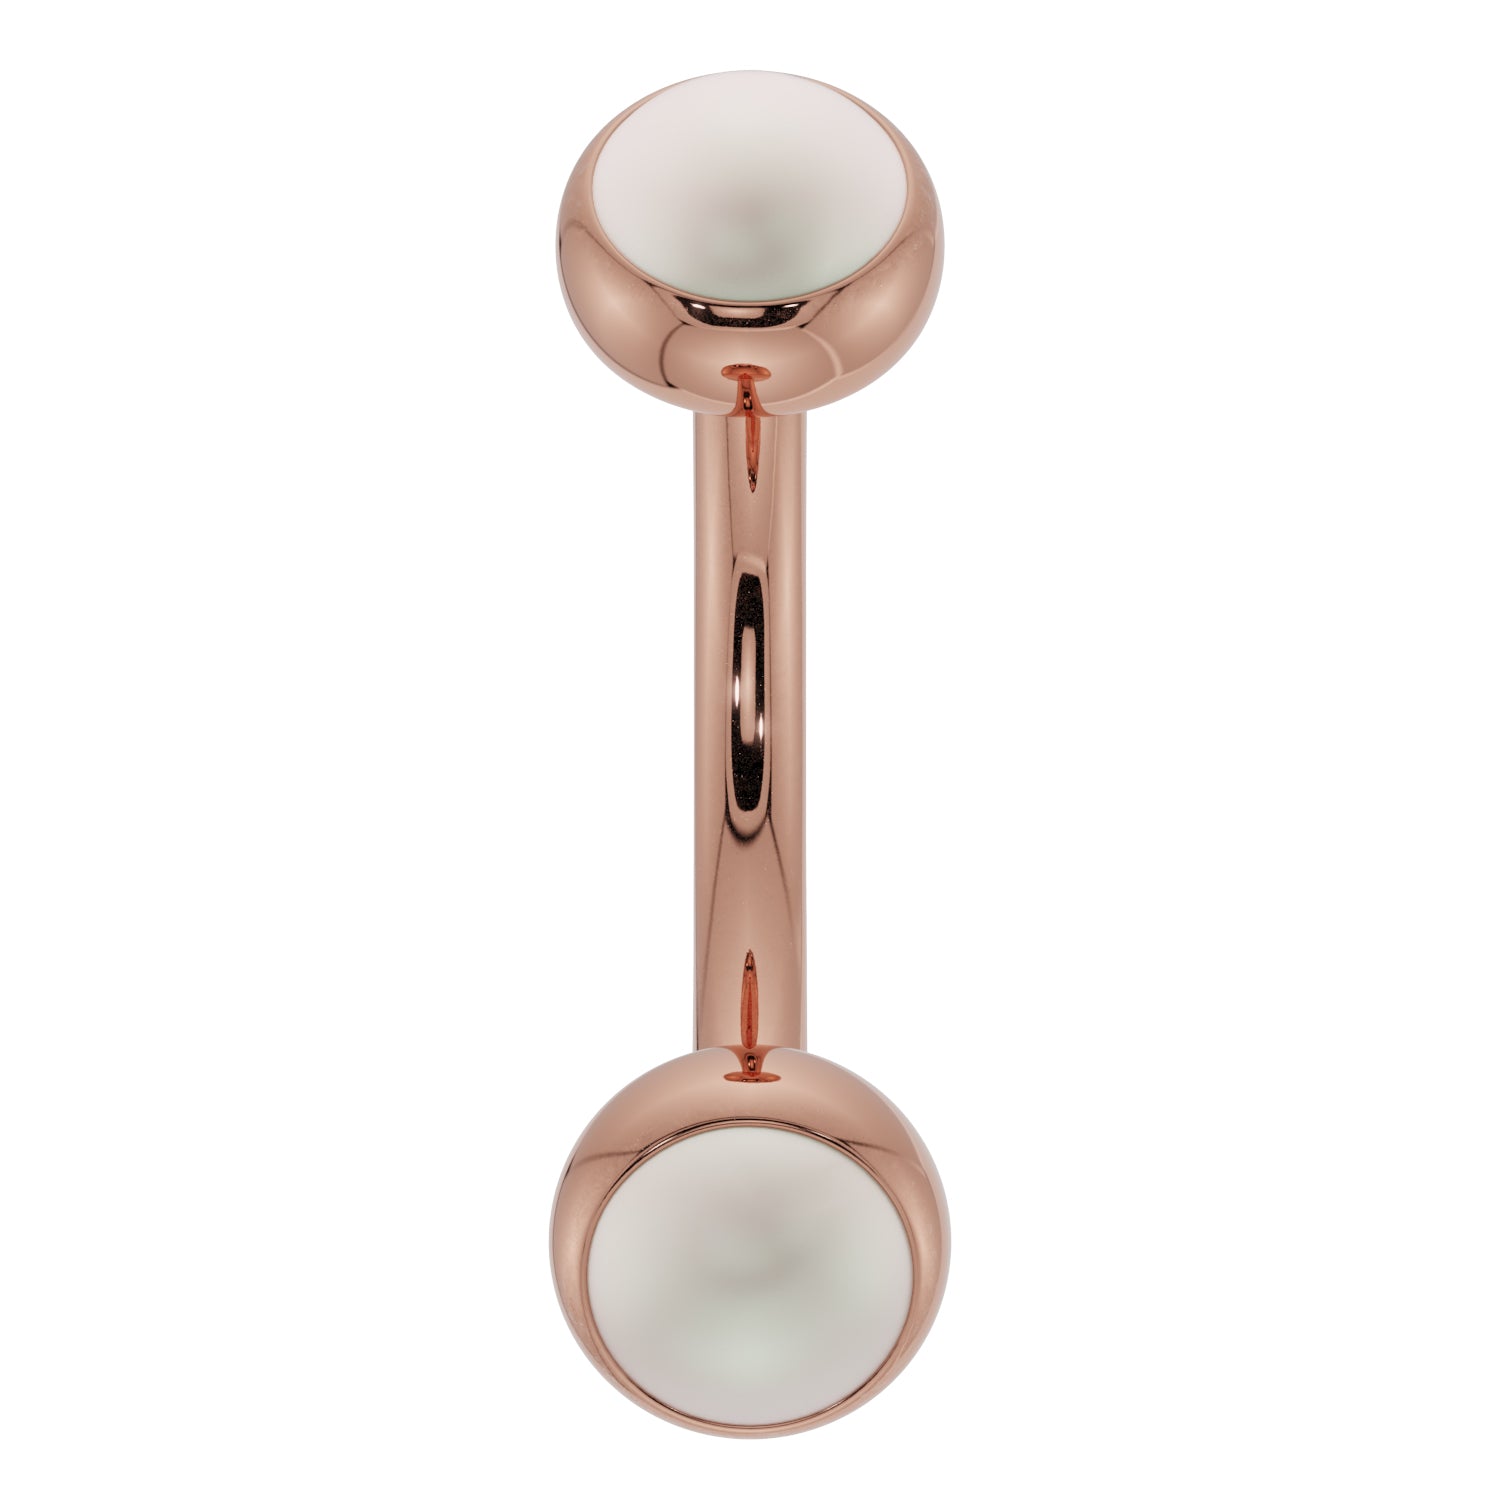 Pearl Bezel-Set Eyebrow Rook Belly Curved Barbell-14K Rose Gold   14G (1.6mm) (Belly Ring)   7 16